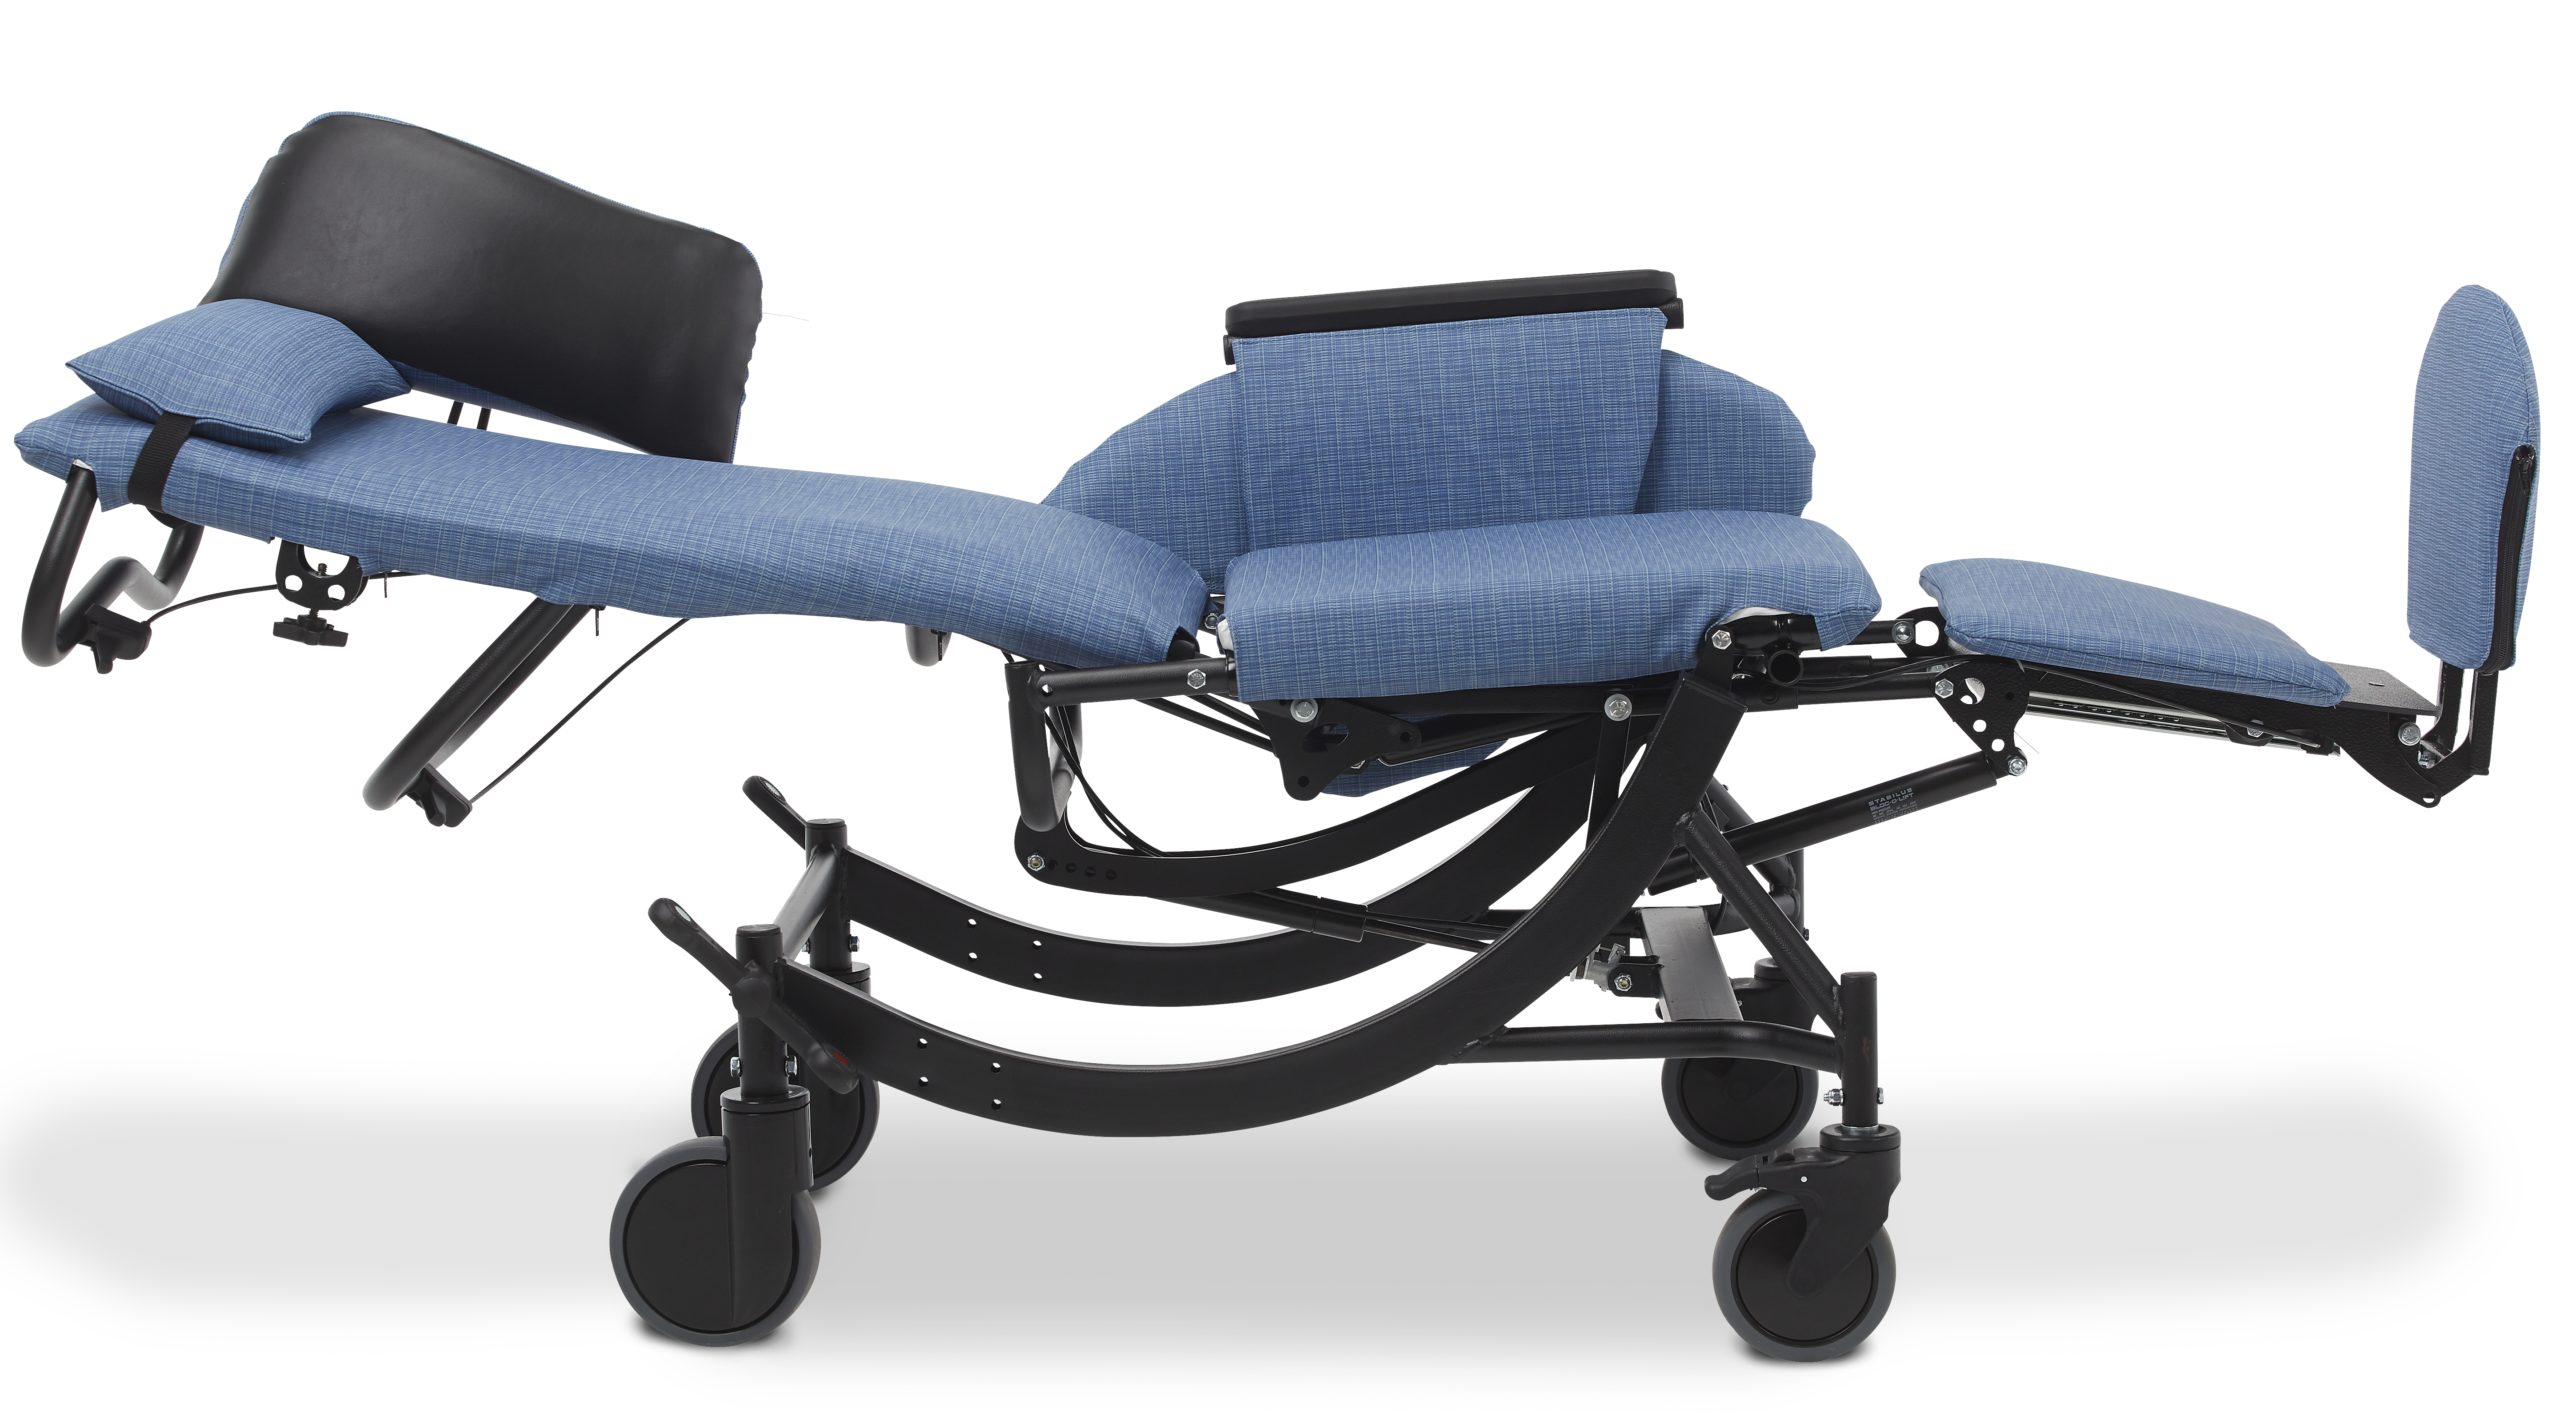 An adjustable chair in blue